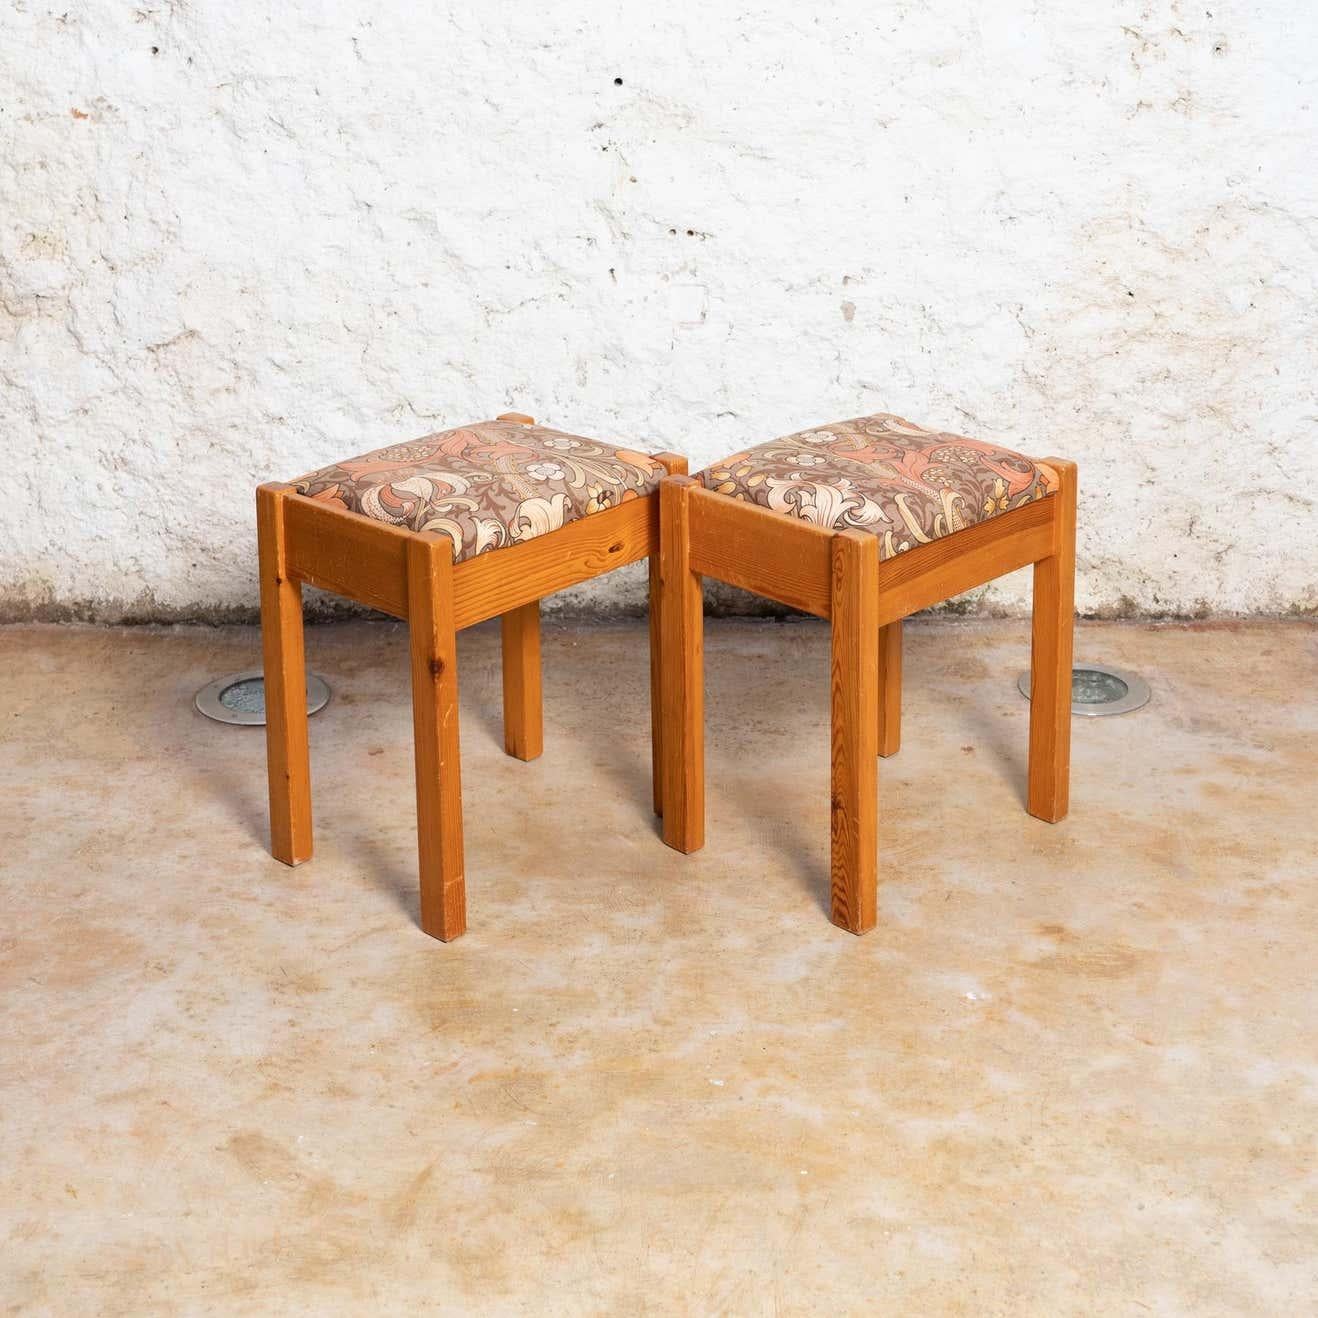 Set of Two Traditional Catalan Pine Stools in Original Fabric, circa 1960 For Sale 7